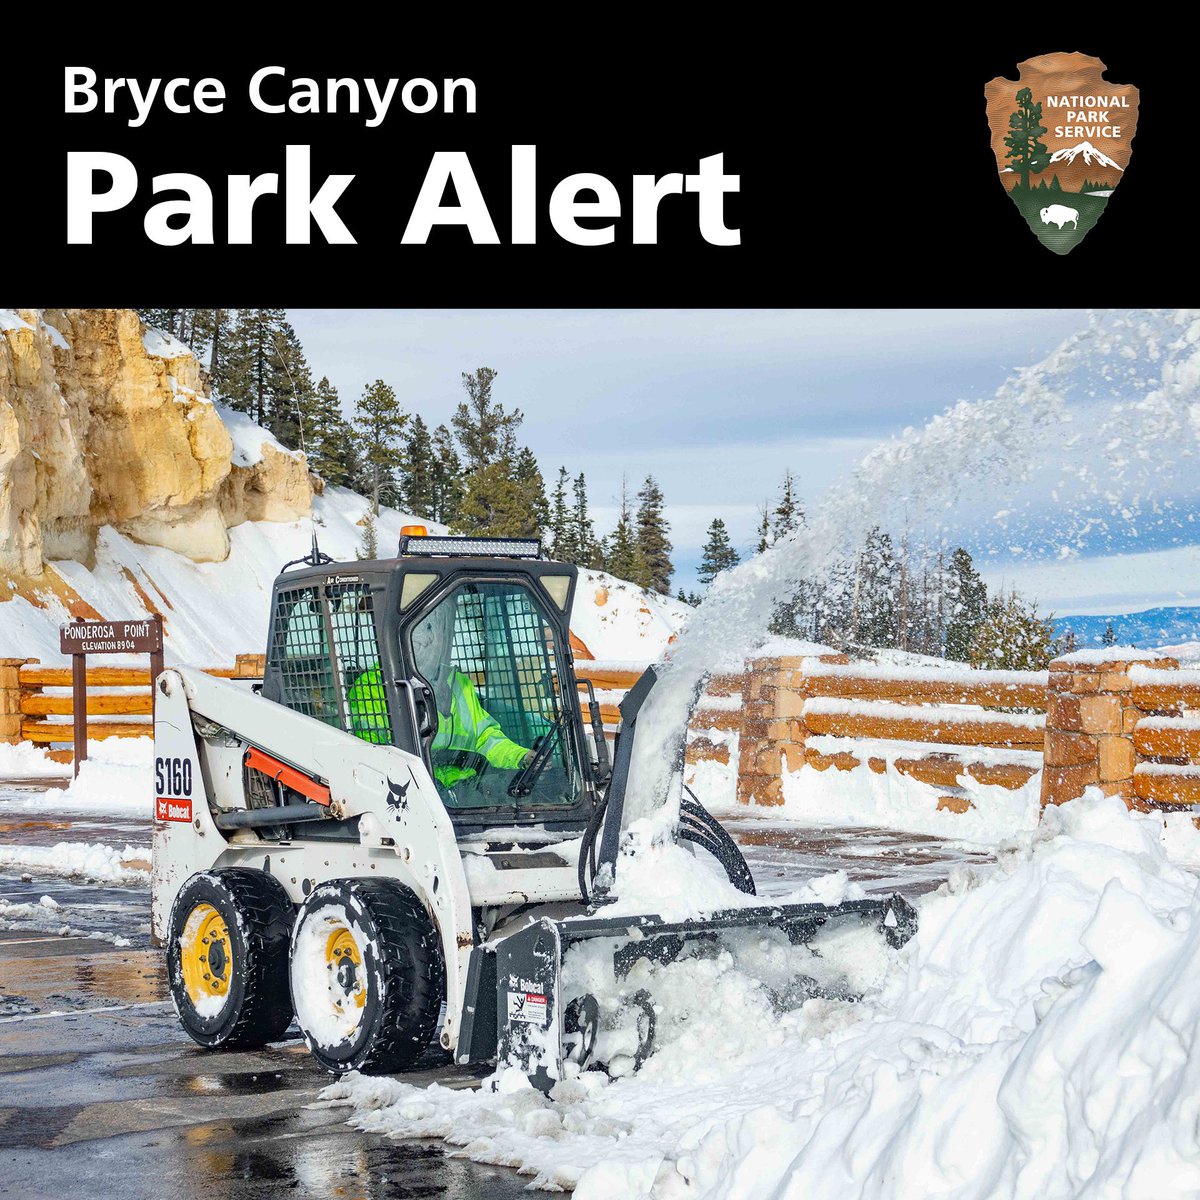 ✅ The main park road is fully open to Rainbow Point (Mile 18 of 18). During snowstorms the road may temporarily close at Mile 3 for snowplow operations. go.nps.gov/BryceConditions